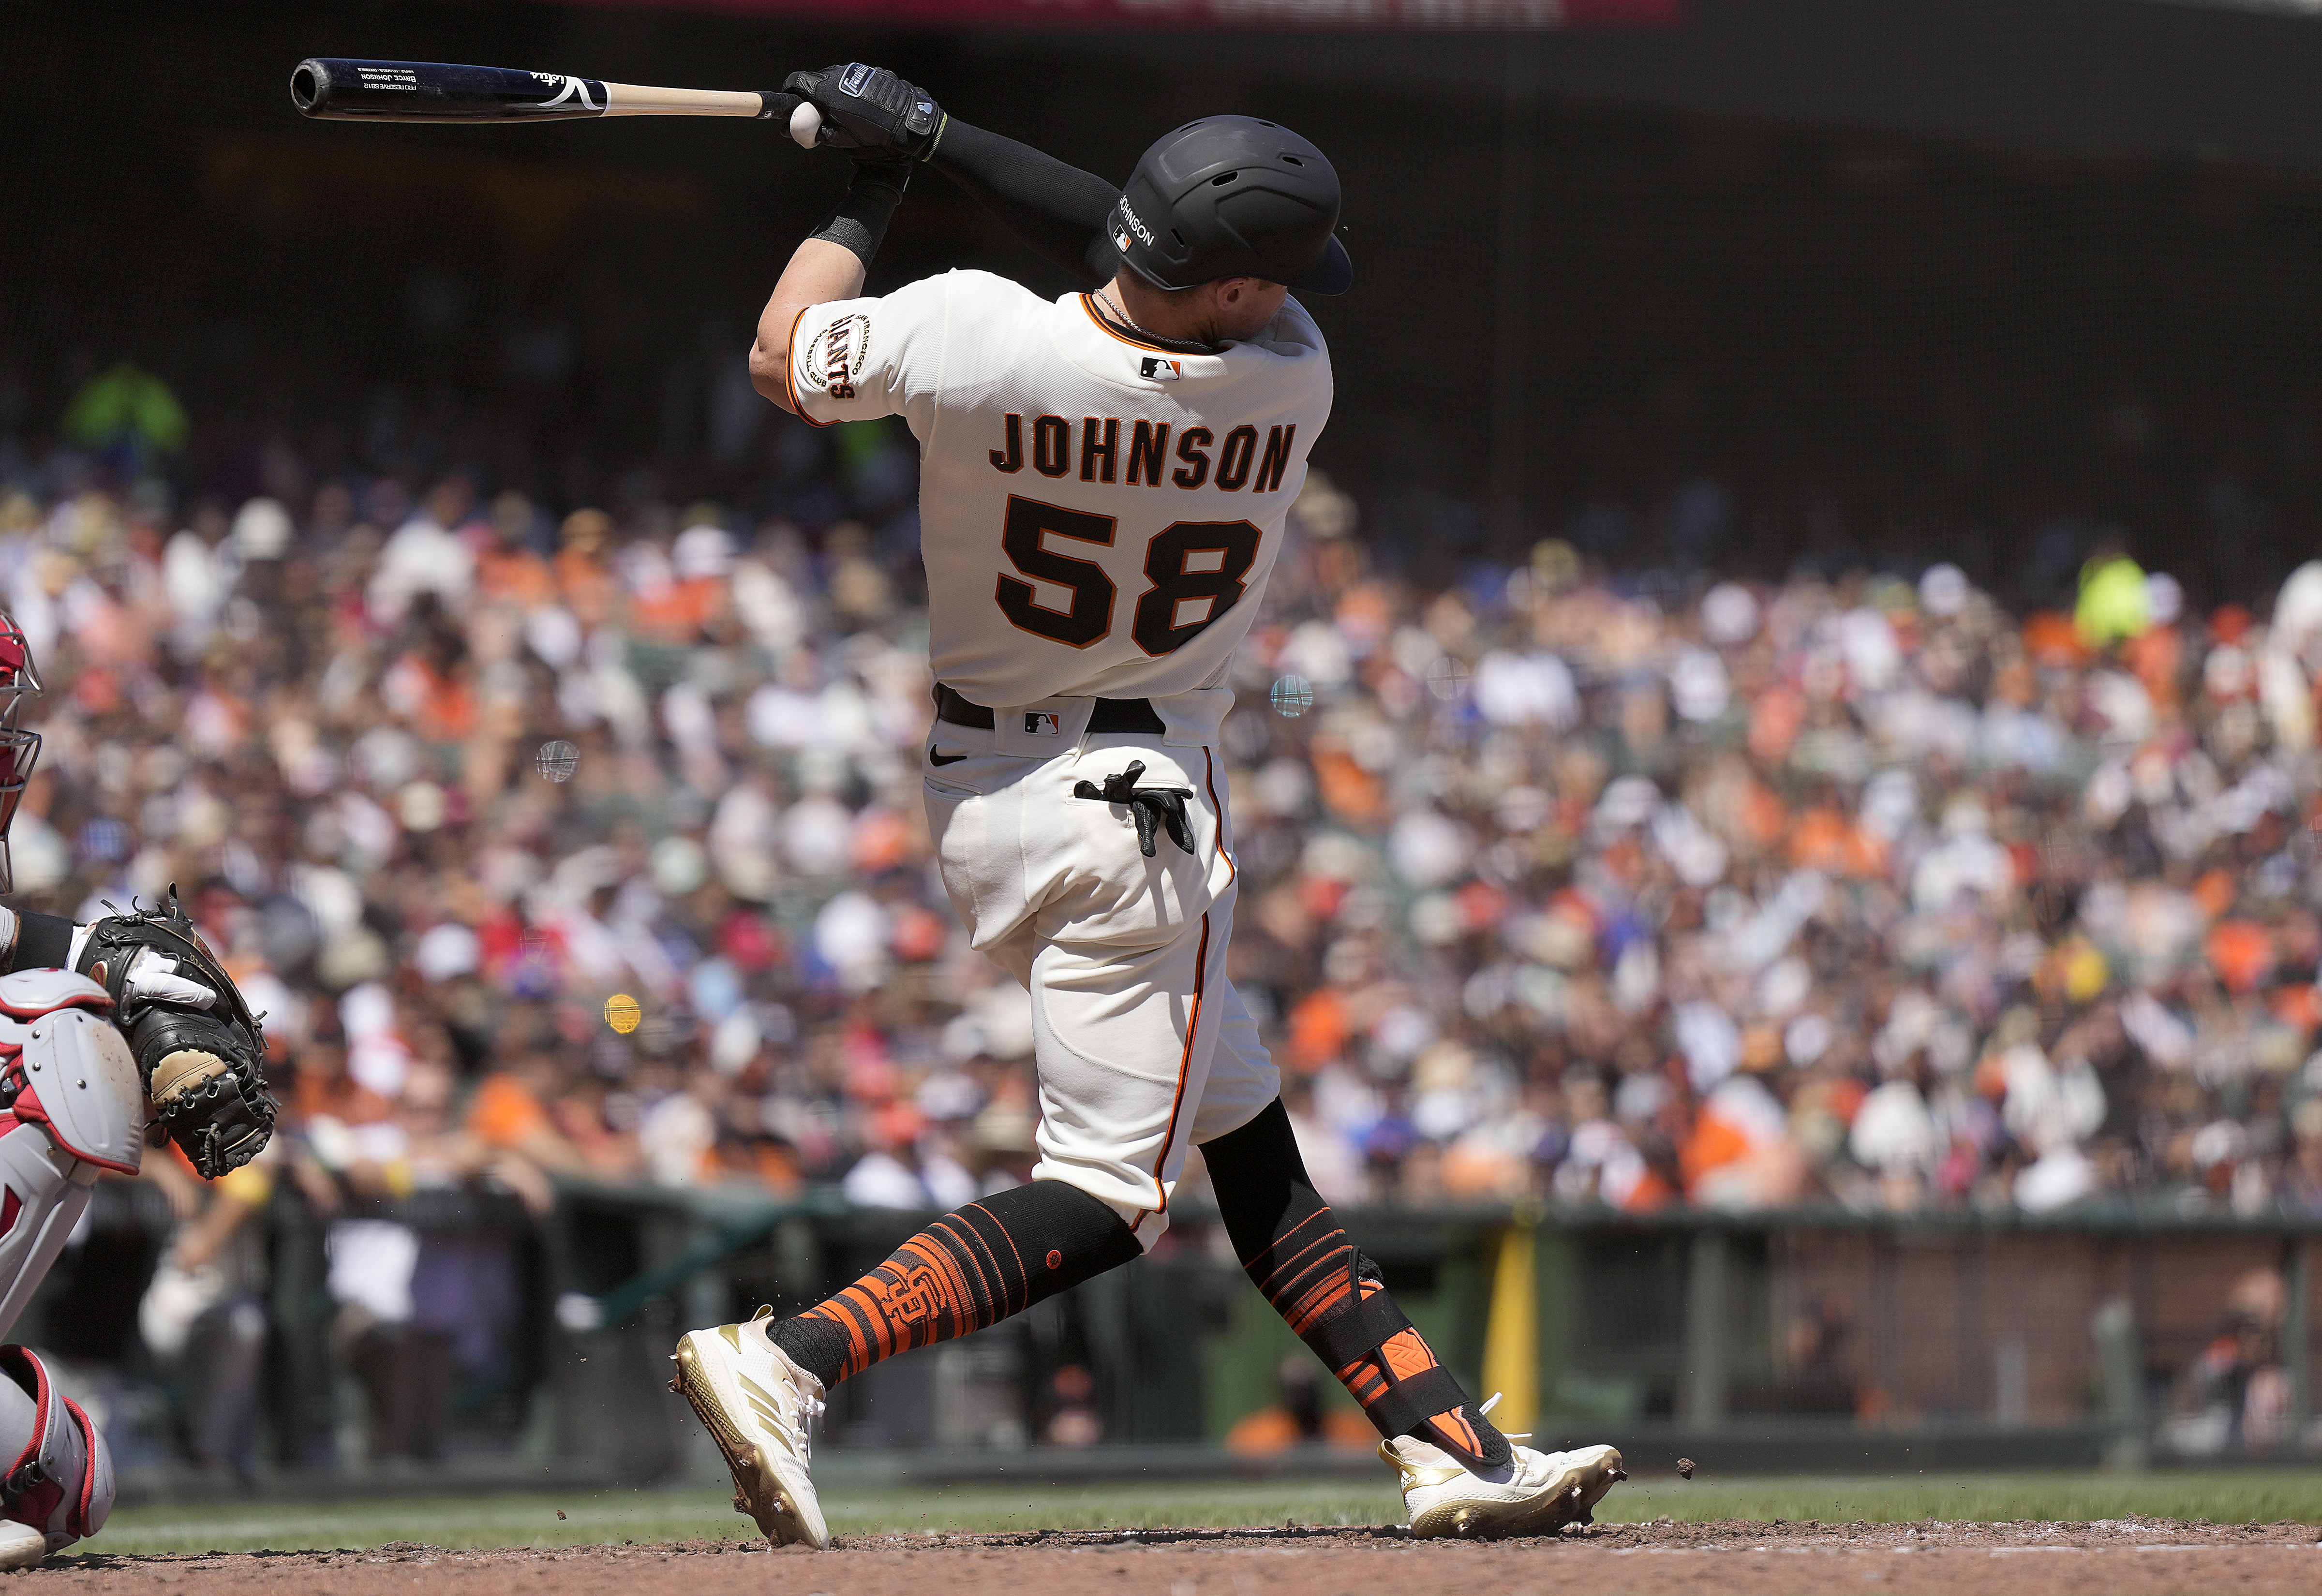 Bryce Johnson finishing his swing in a home Giants jersey